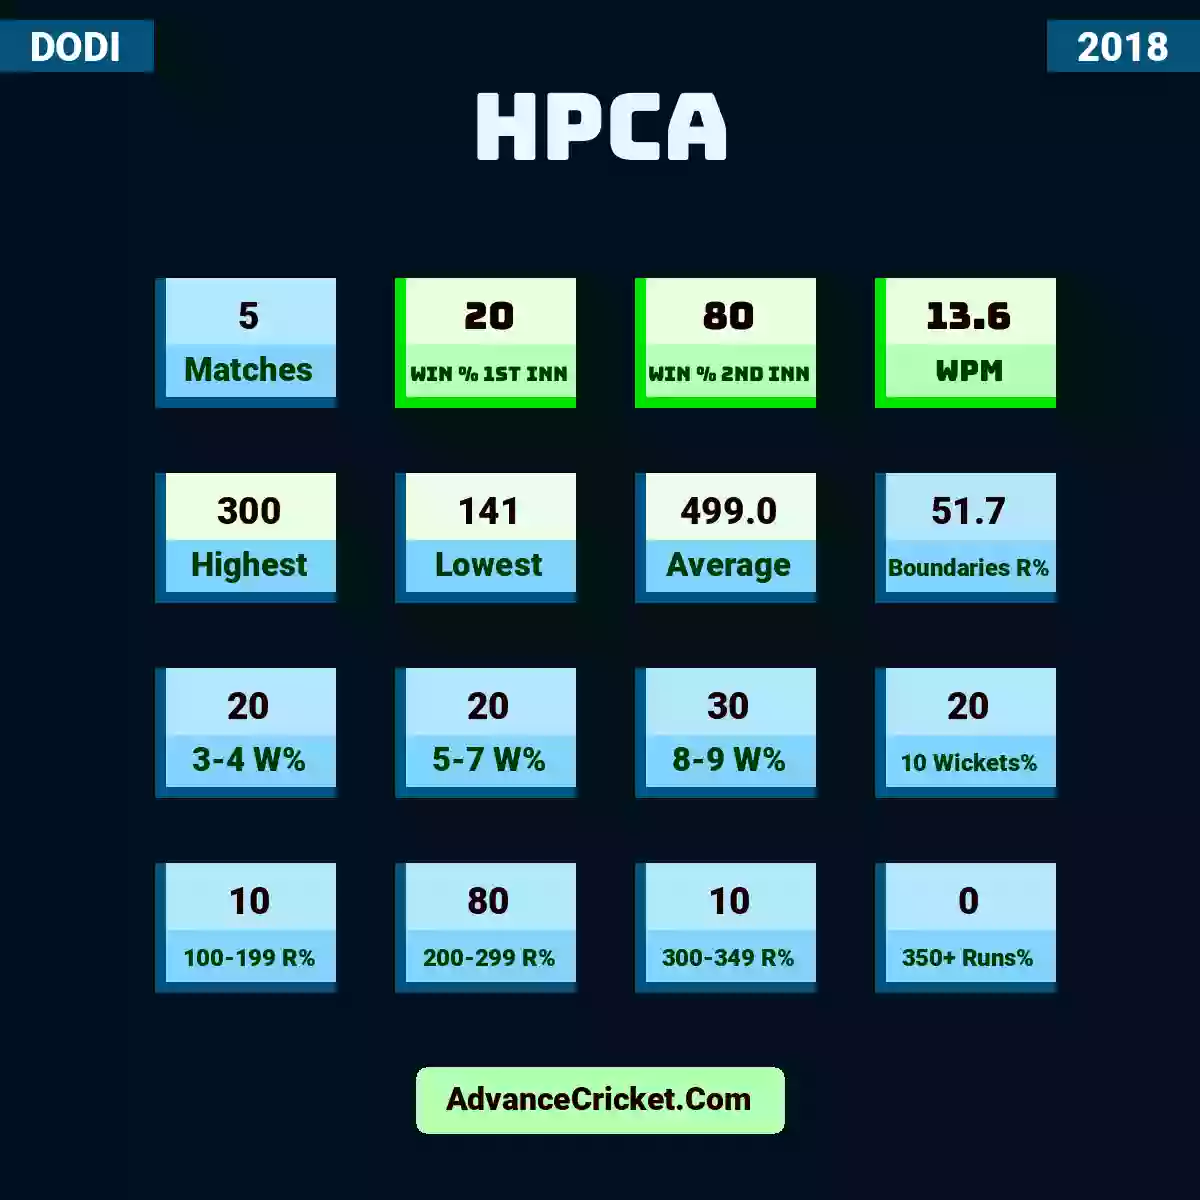 Image showing HPCA with Matches: 5, Win % 1st Inn: 20, Win % 2nd Inn: 80, WPM: 13.6, Highest: 300, Lowest: 141, Average: 499.0, Boundaries R%: 51.7, 3-4 W%: 20, 5-7 W%: 20, 8-9 W%: 30, 10 Wickets%: 20, 100-199 R%: 10, 200-299 R%: 80, 300-349 R%: 10, 350+ Runs%: 0.